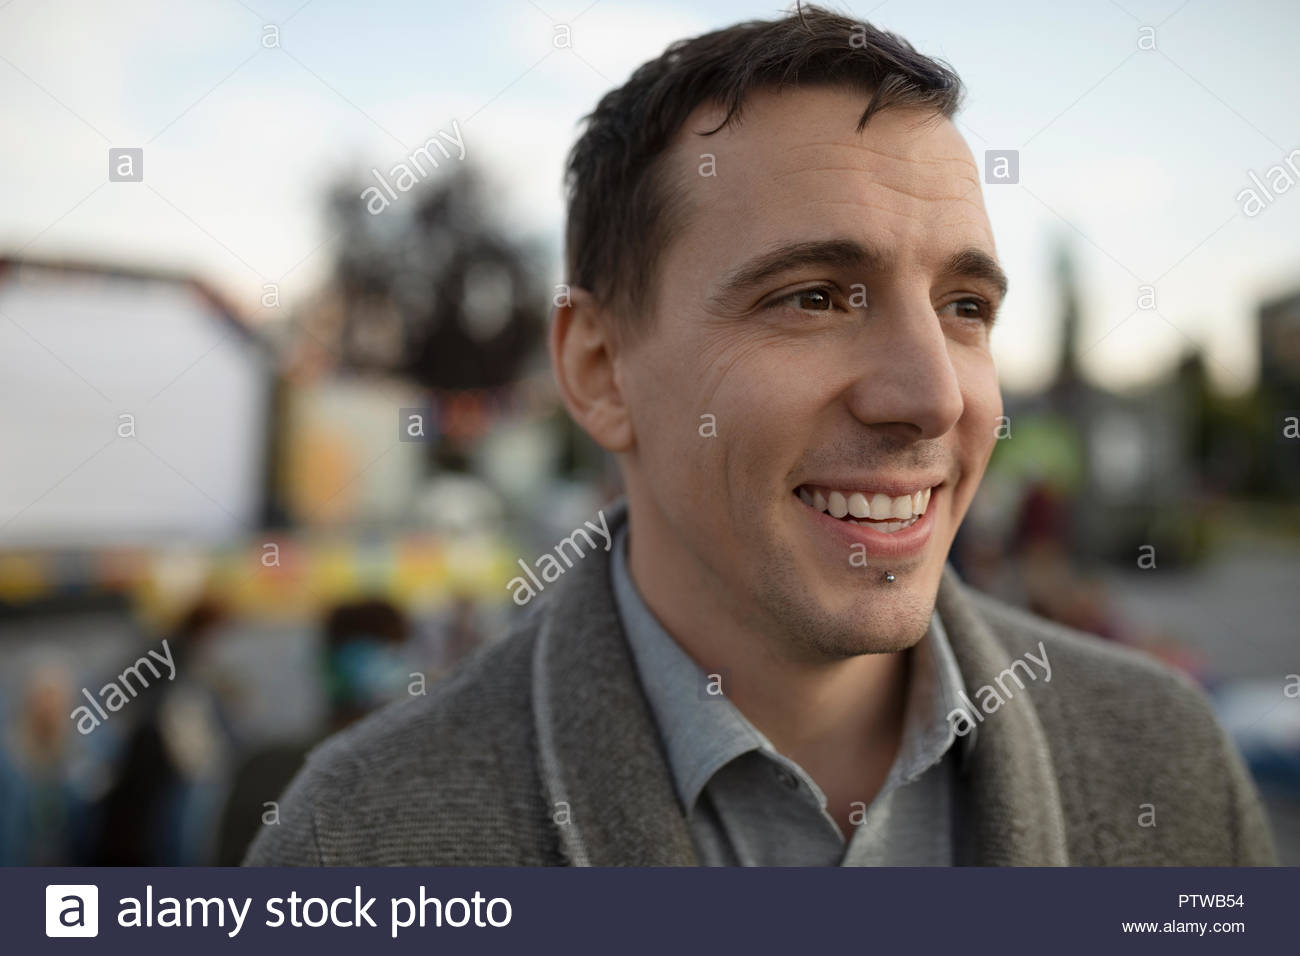 Portrait smiling man with chin piercing looking away Stock Photo